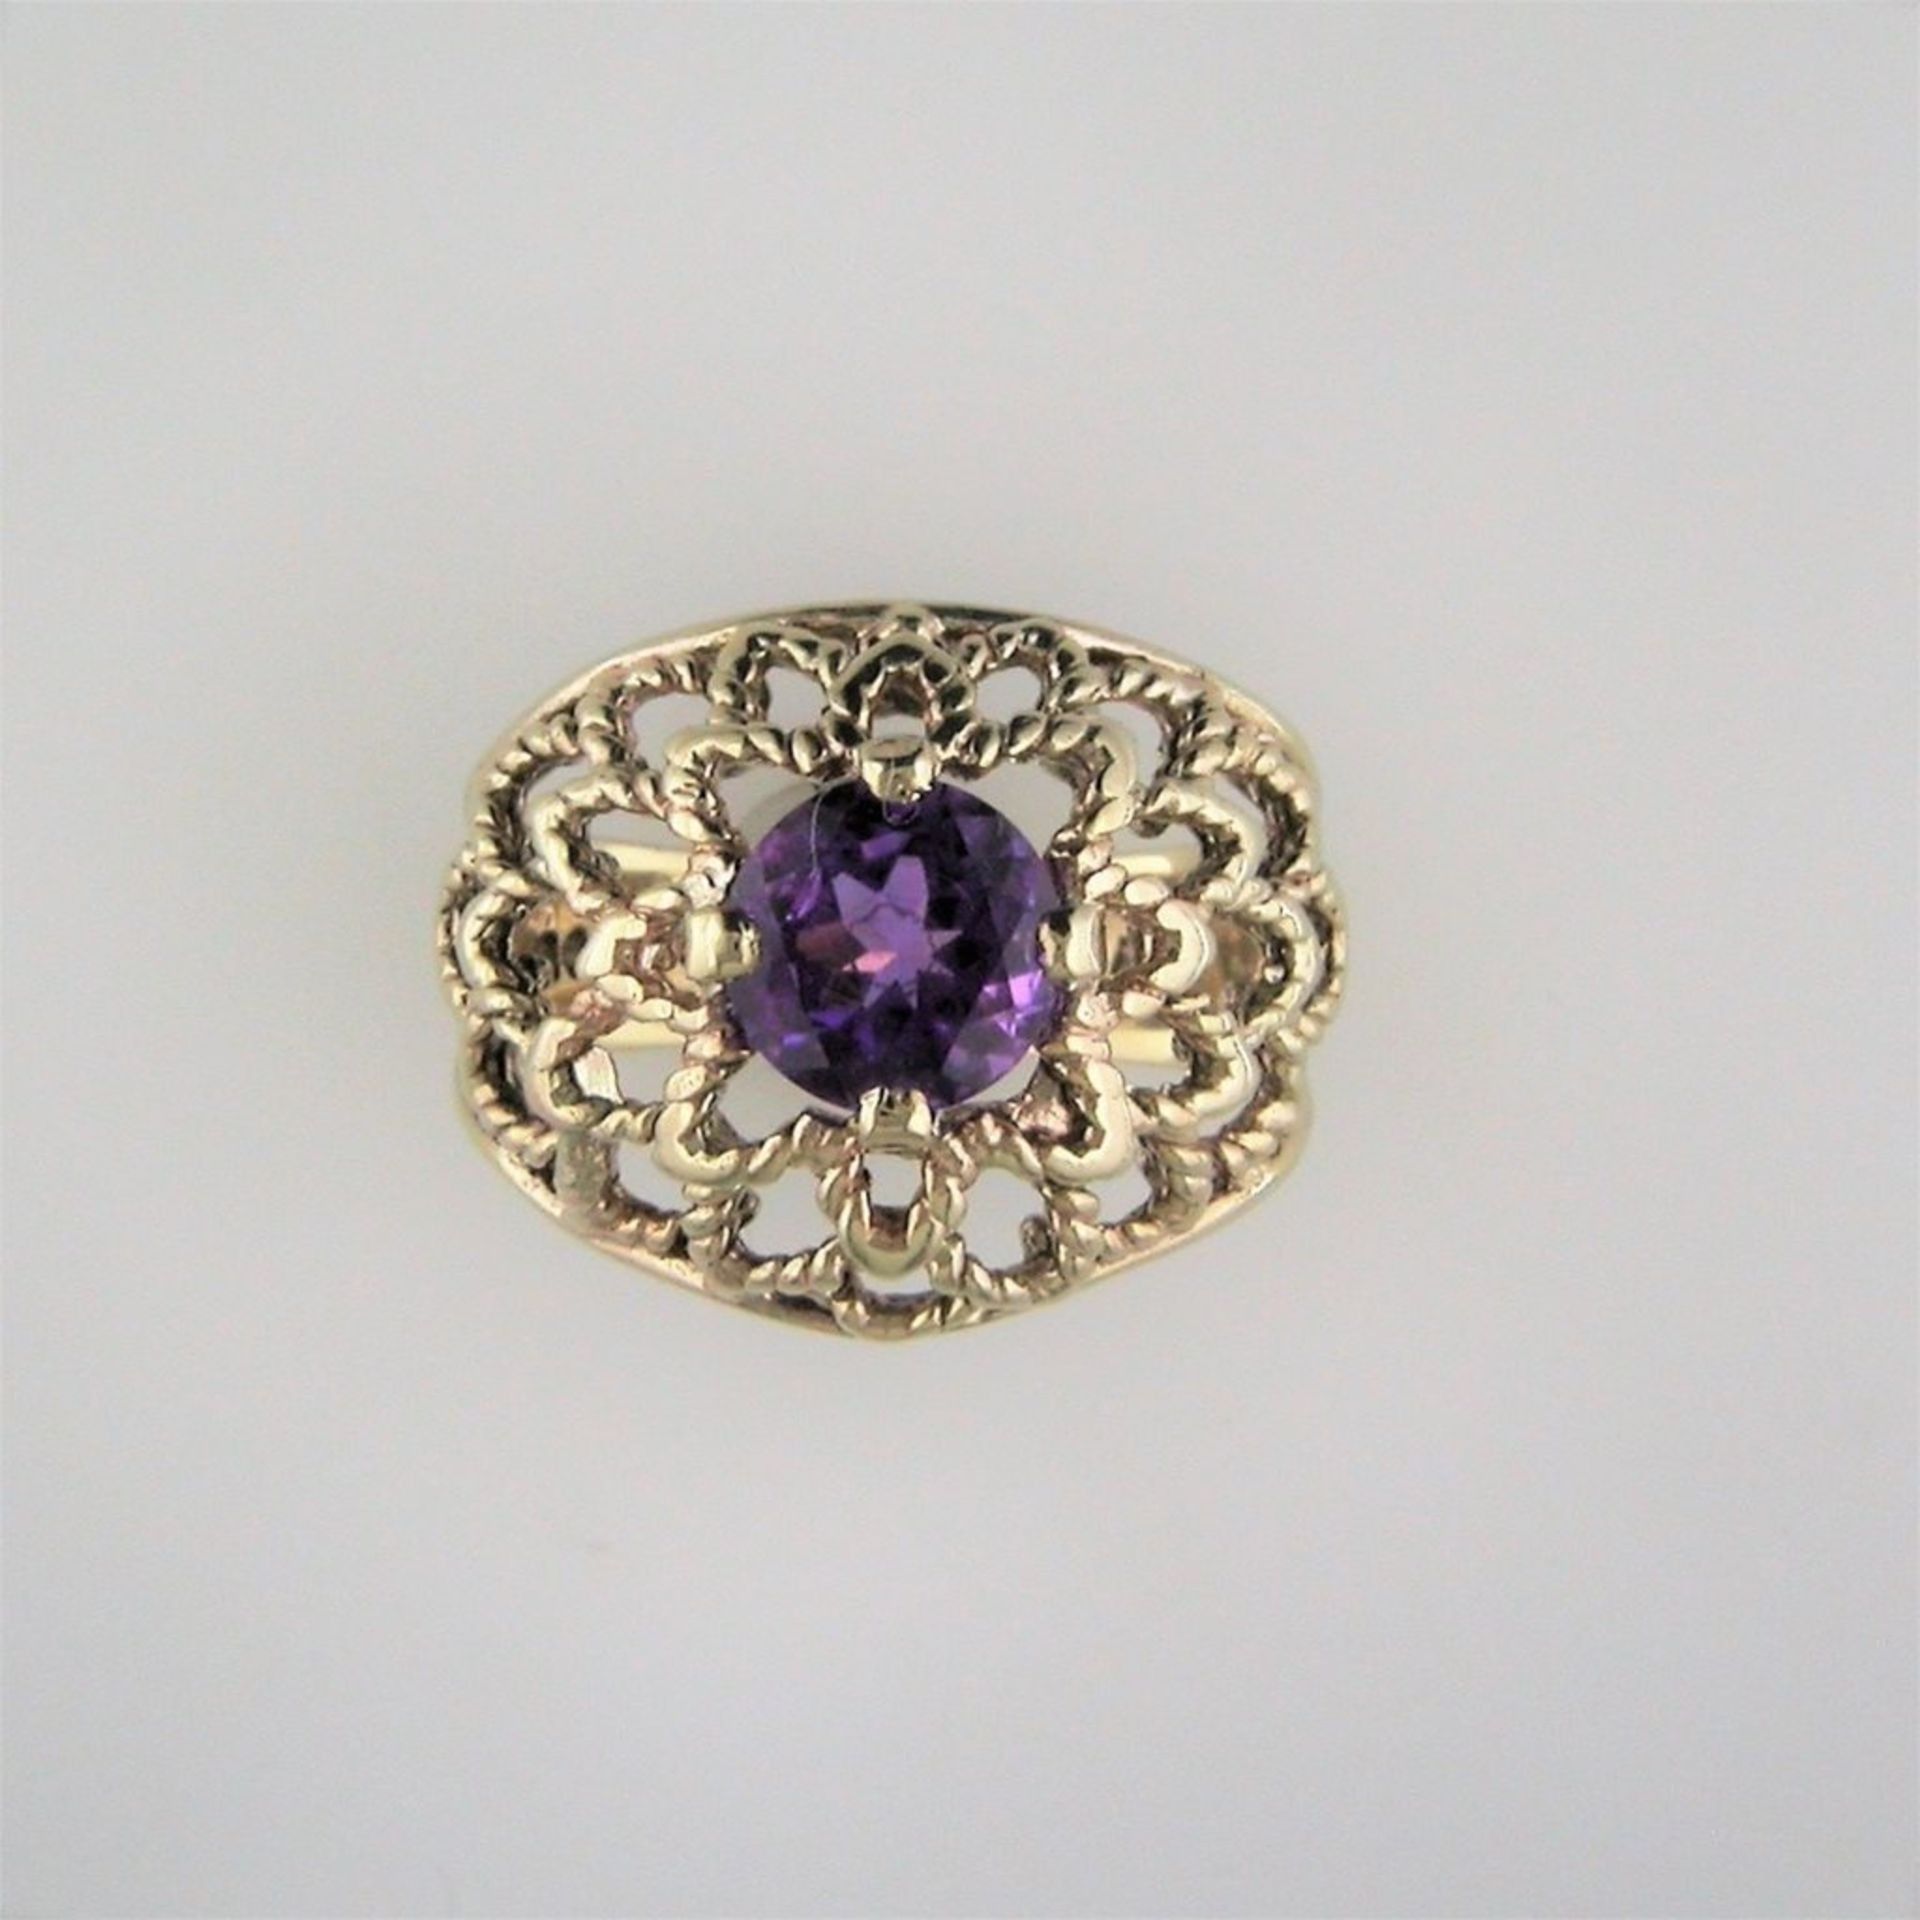 A "Fully Restored" Bombe Style Amethyst Ring - Image 3 of 3